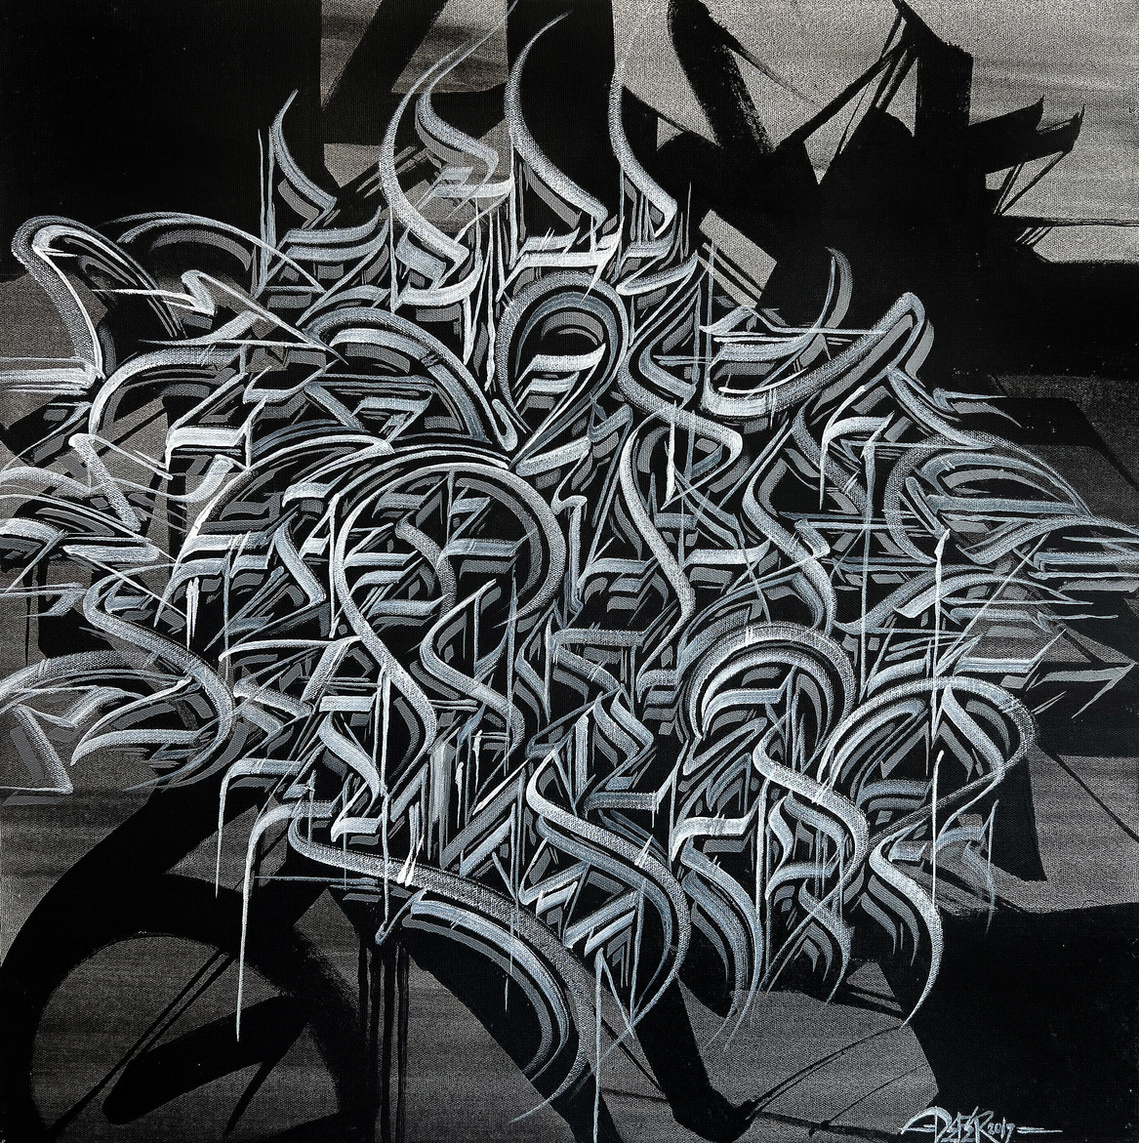 DEFER Iconic Street Art. Eastern Projects Los Angeles Art Gallery. Available Art Work. Pioneer of Graffiti. 